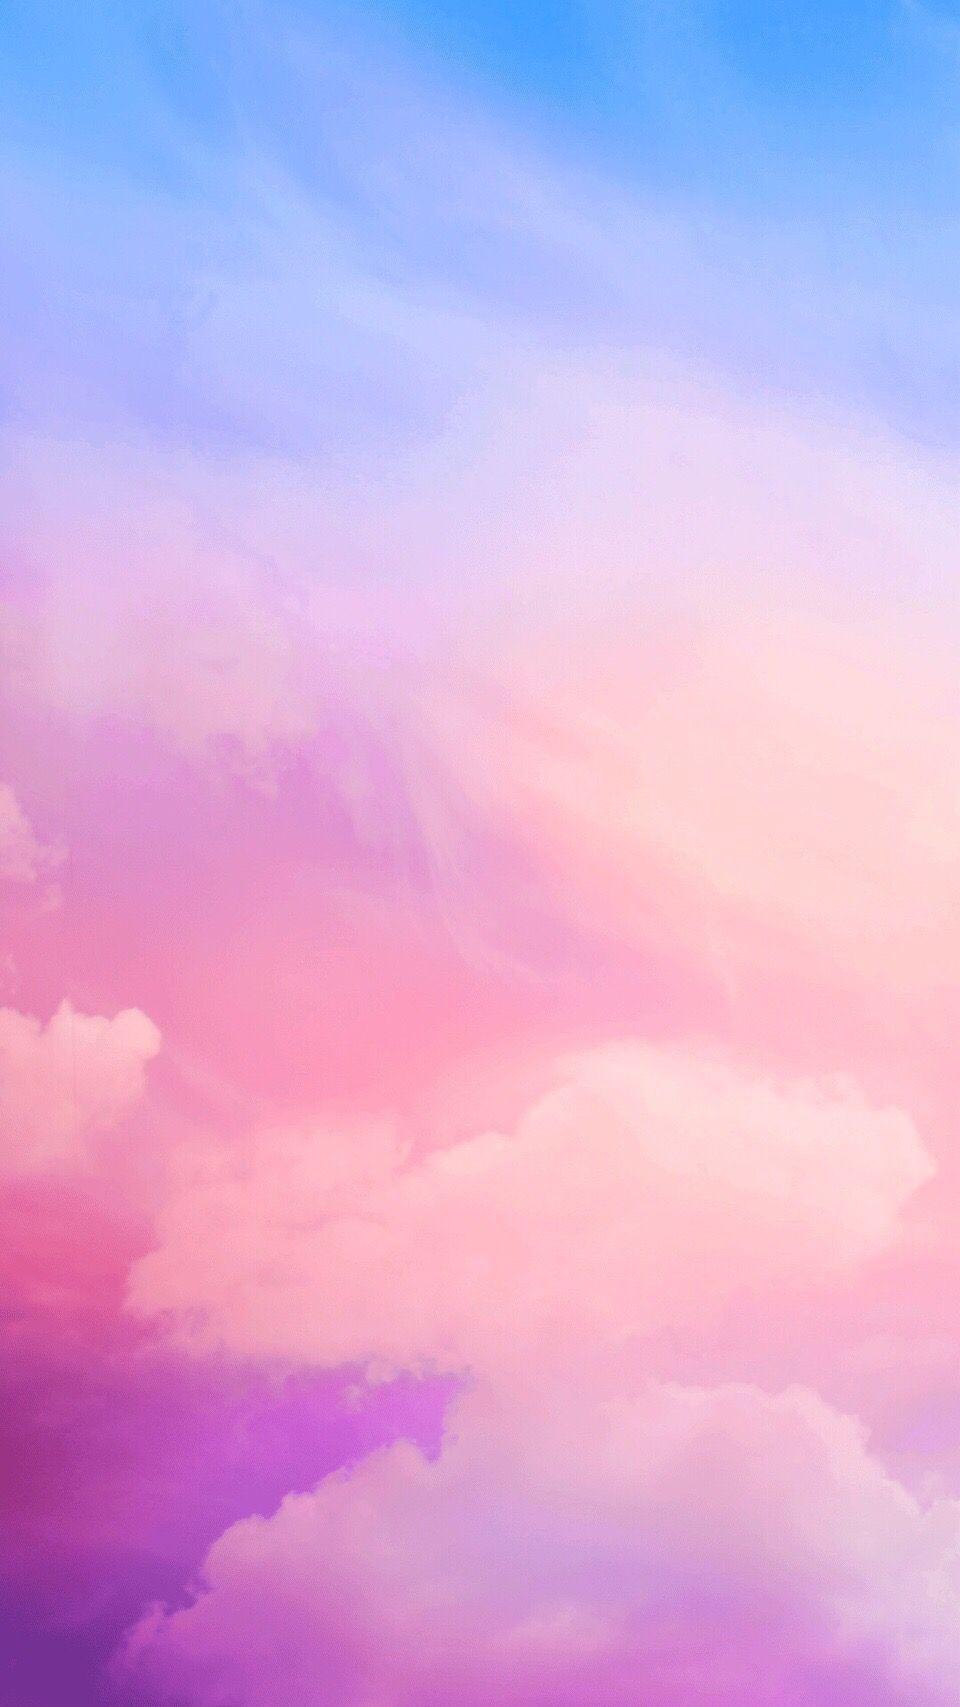 Pink And Blue Clouds Wallpapers Top Free Pink And Blue Clouds Backgrounds Wallpaperaccess